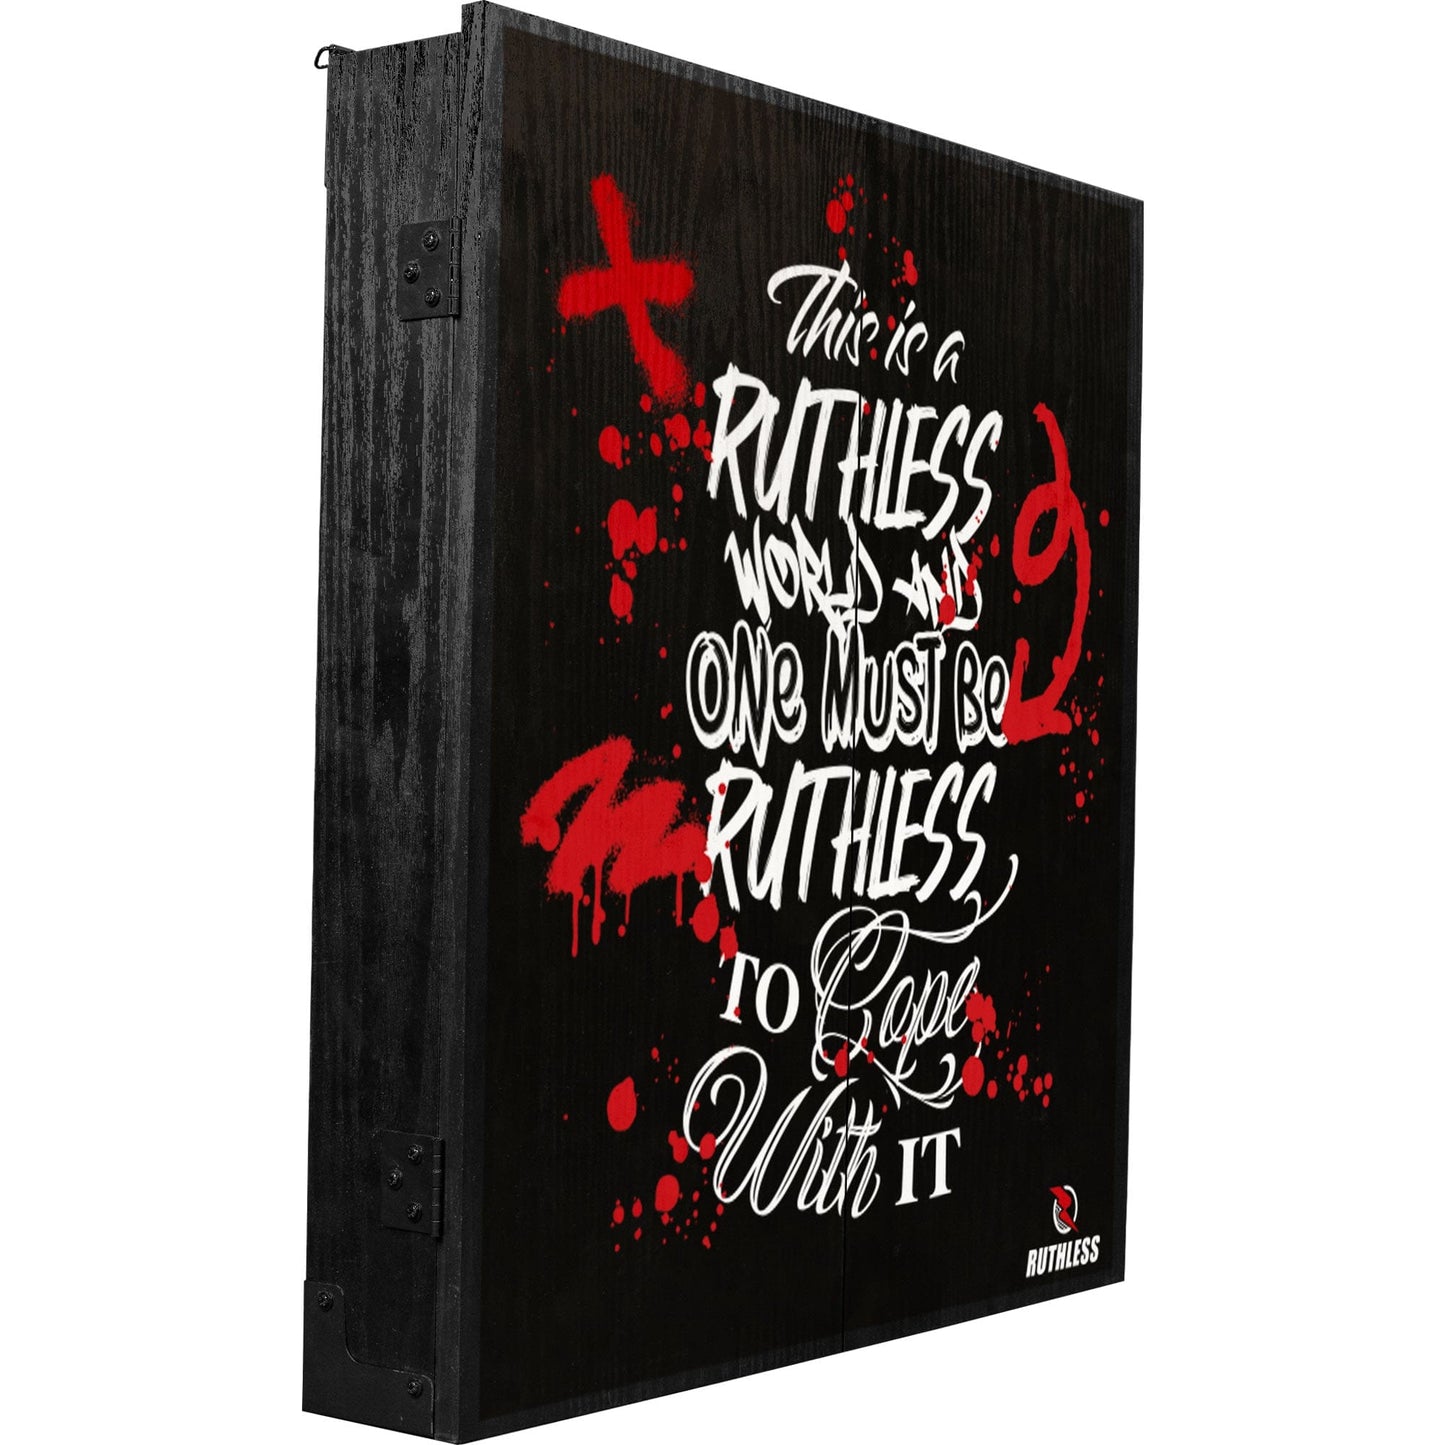 Ruthless Dartboard Cabinet - Square Design - One Must Be Ruthless